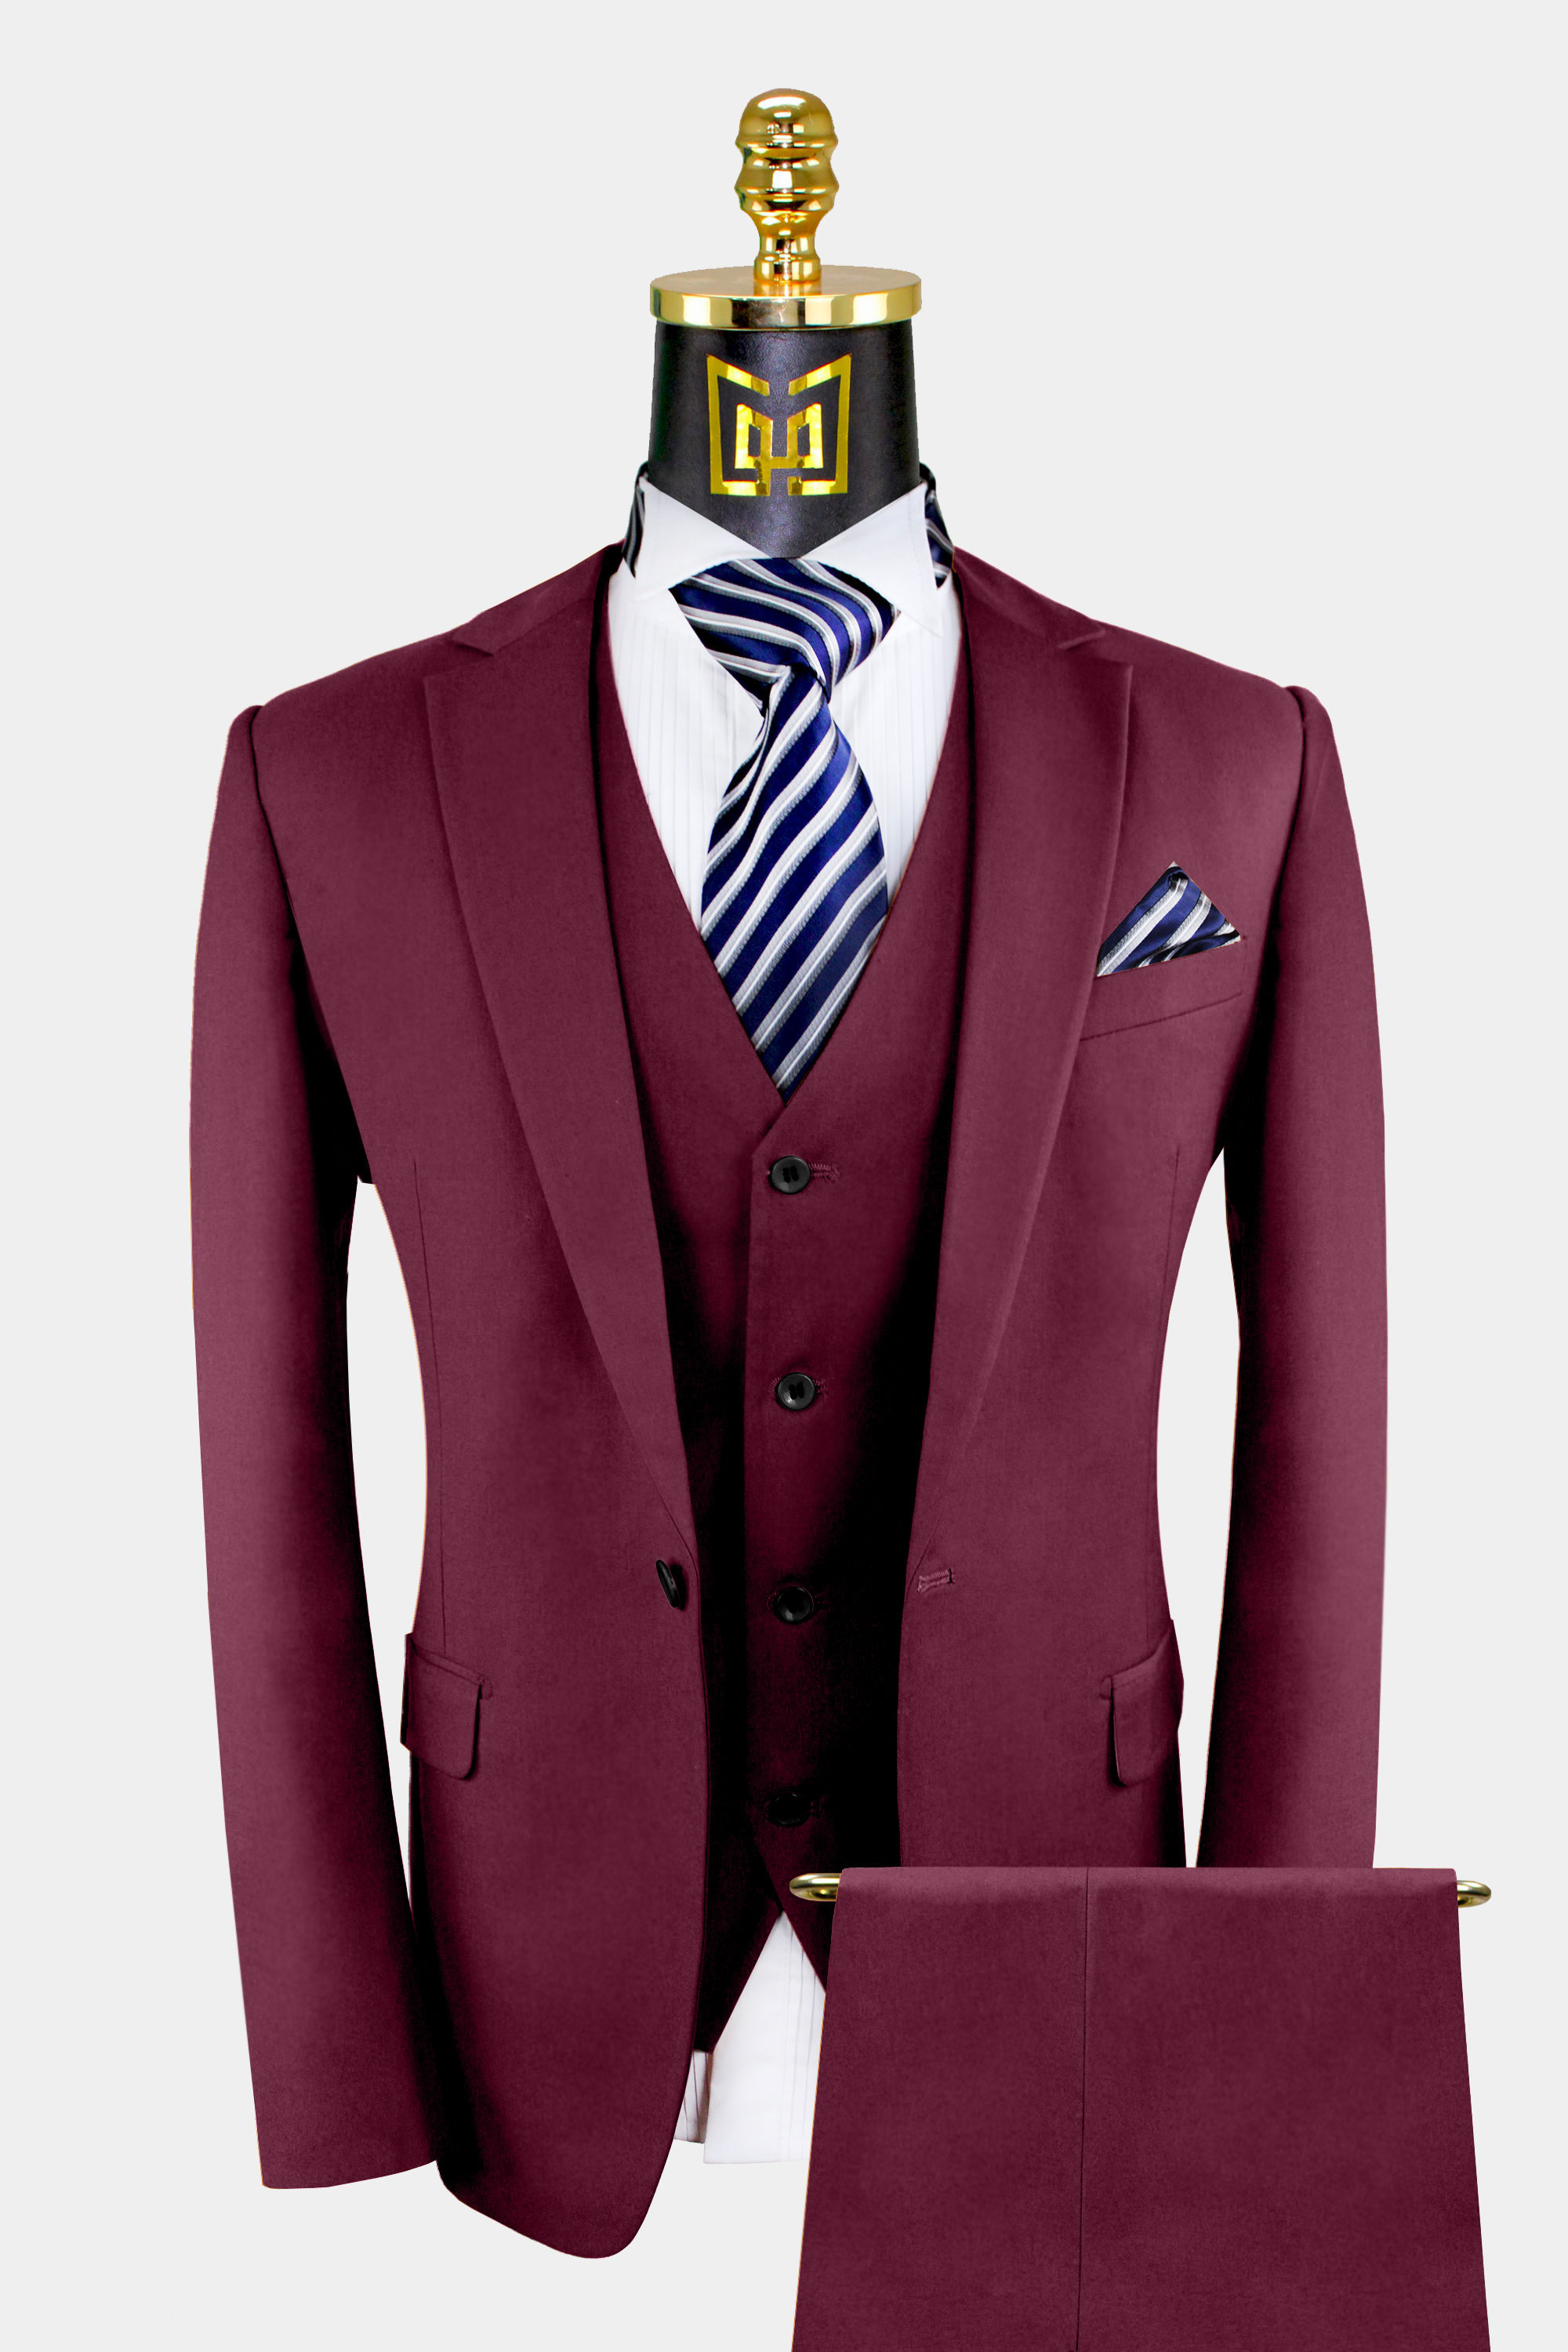 When to Wear a Three-Piece Suit - Knot Standard Blog